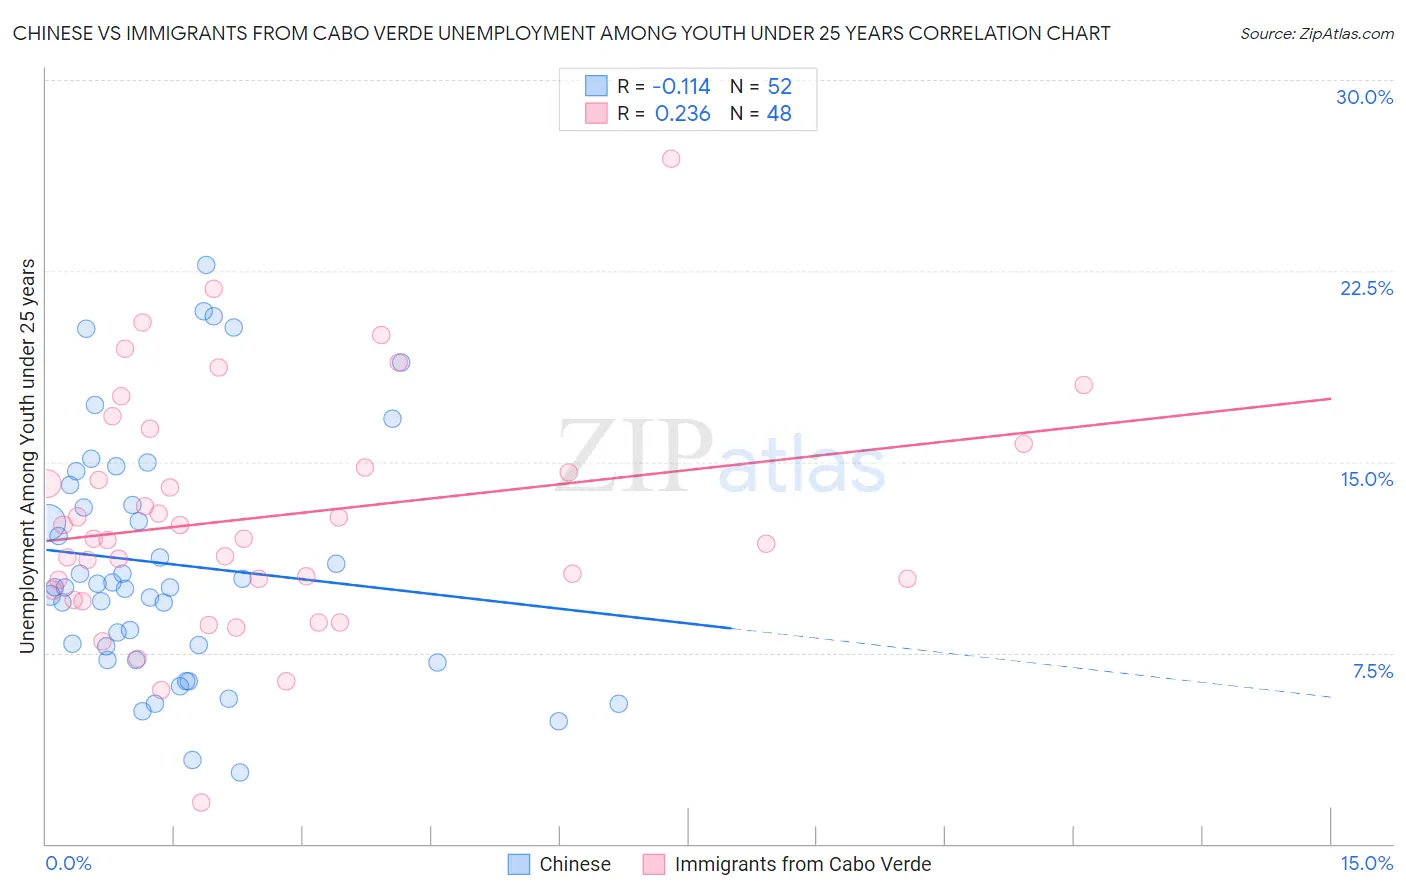 Chinese vs Immigrants from Cabo Verde Unemployment Among Youth under 25 years